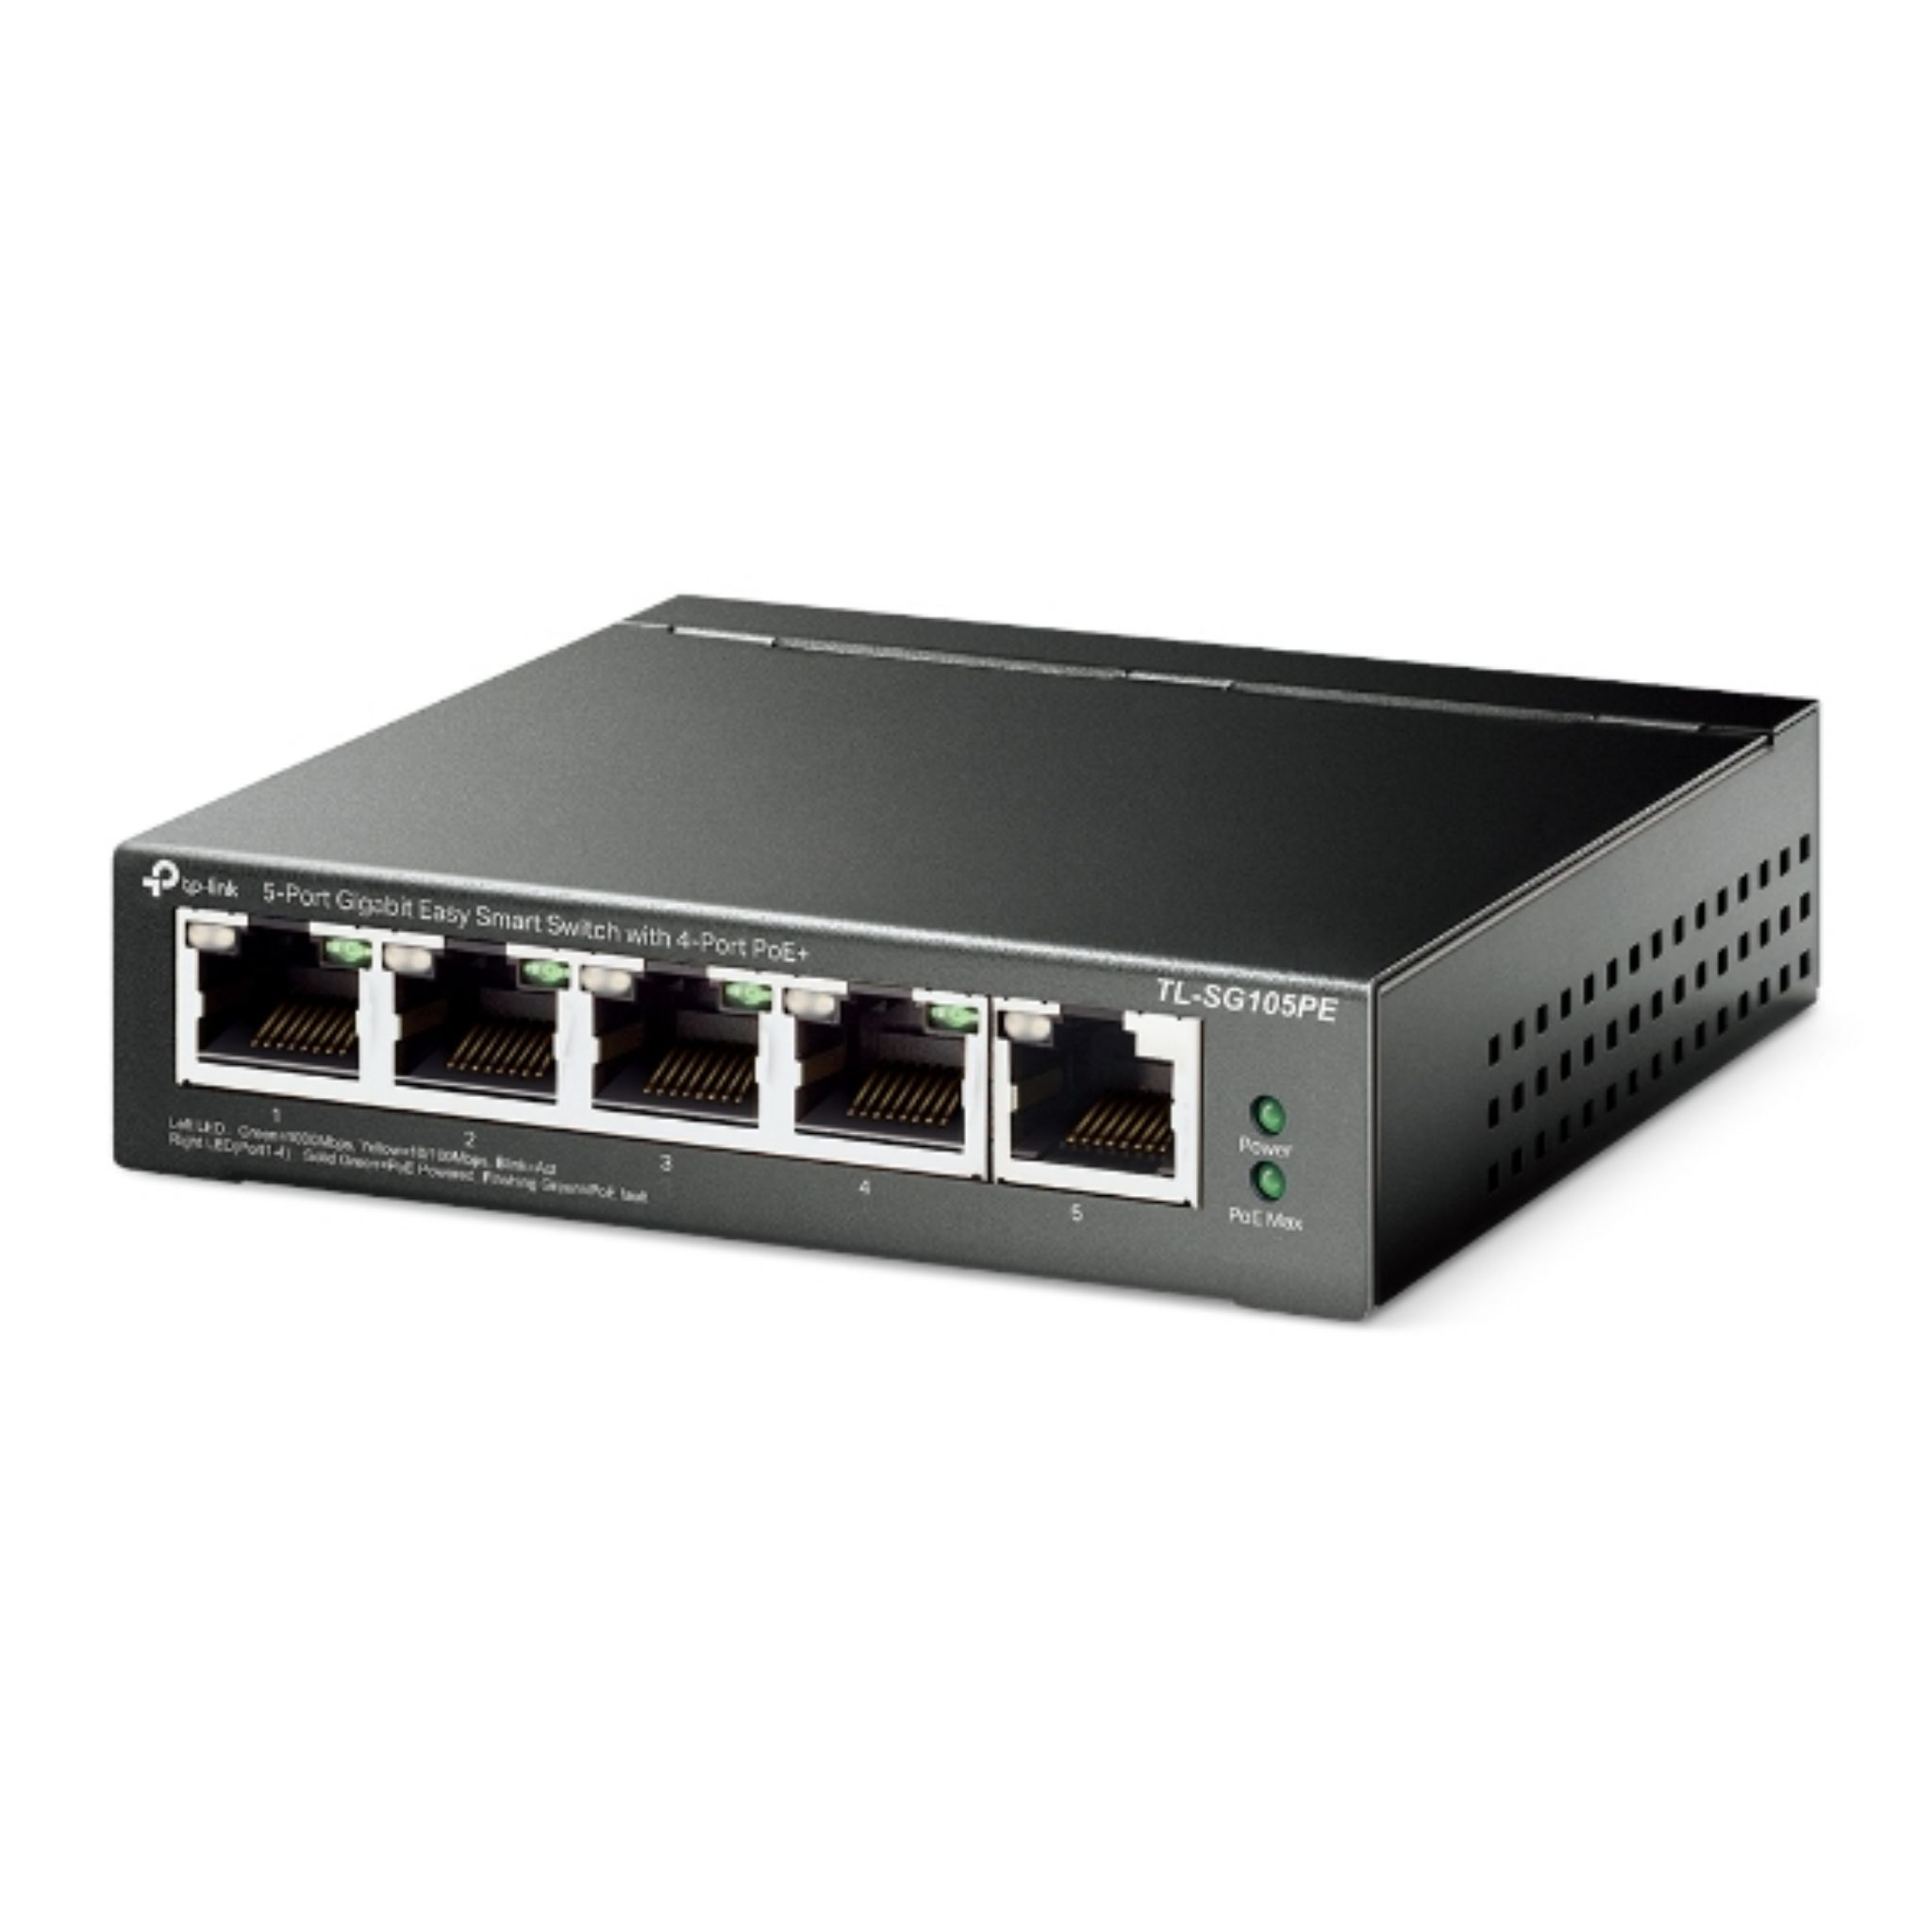 5 TP-LINK TL-SG105PE Switch